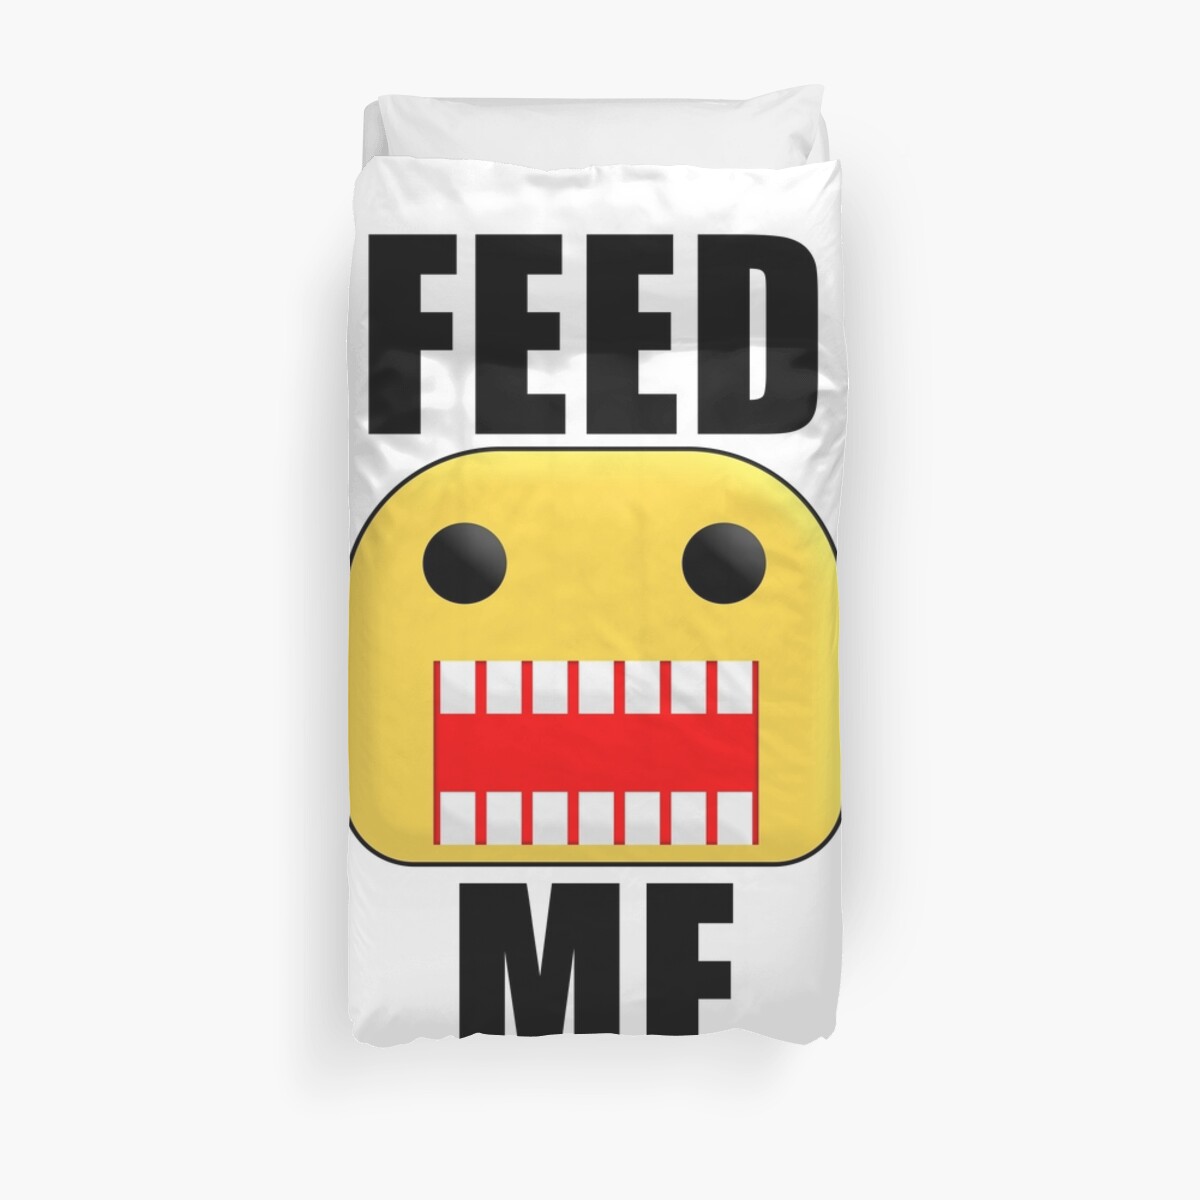 Roblox Feed Me Giant Noob Duvet Cover By Jenr8d Designs Redbubble - roblox feed me giant noob canvas print by jenr8d designs redbubble